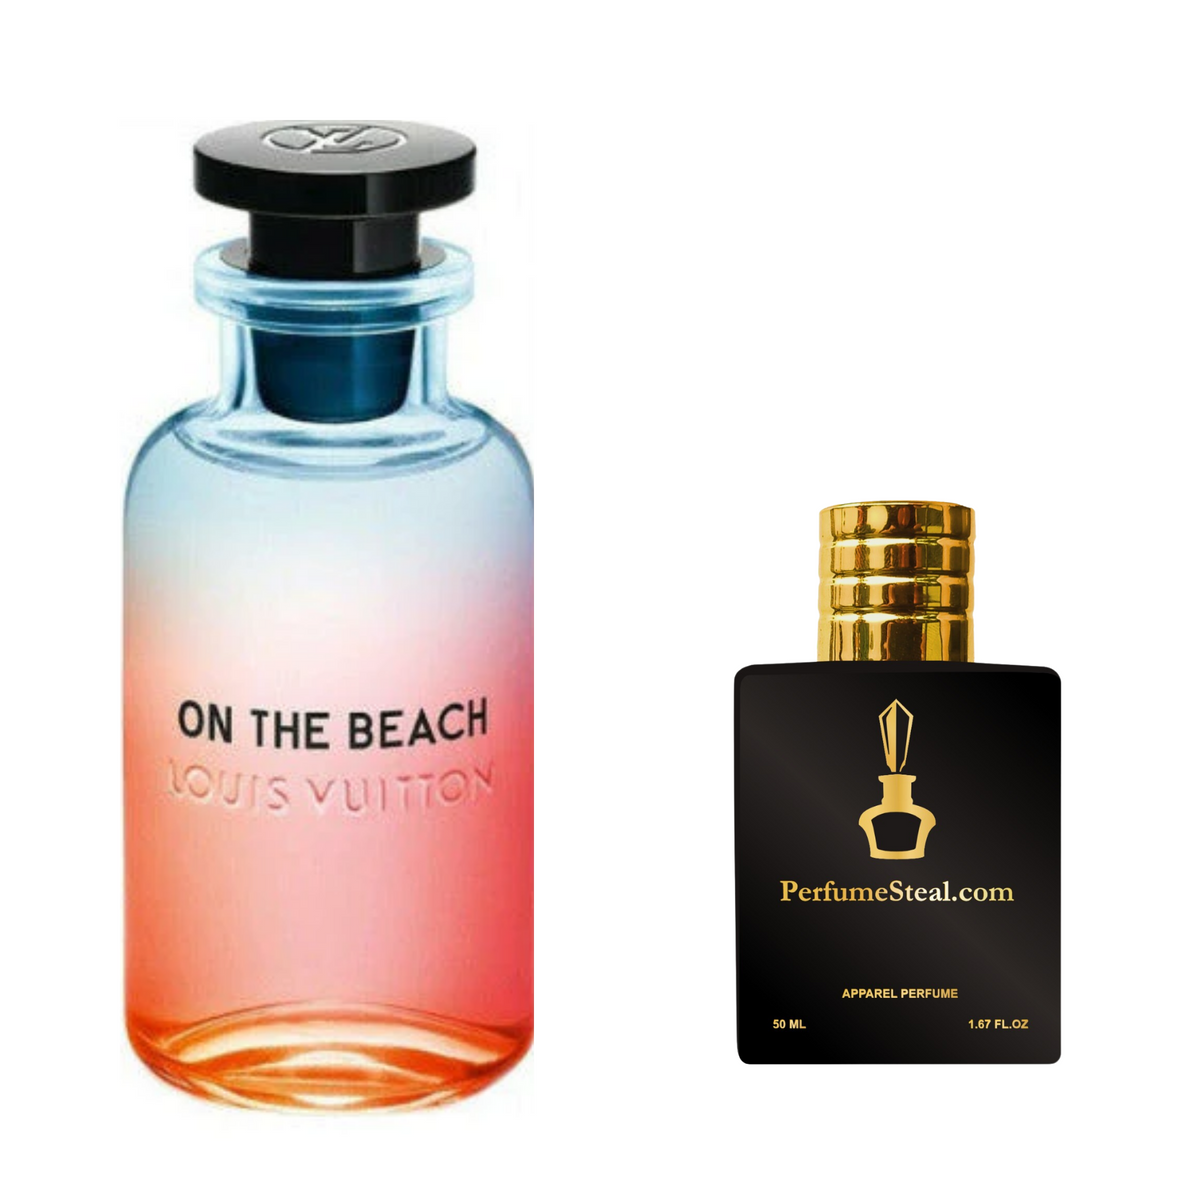 Louis Vuitton On The Beach Fragrance Reviewed